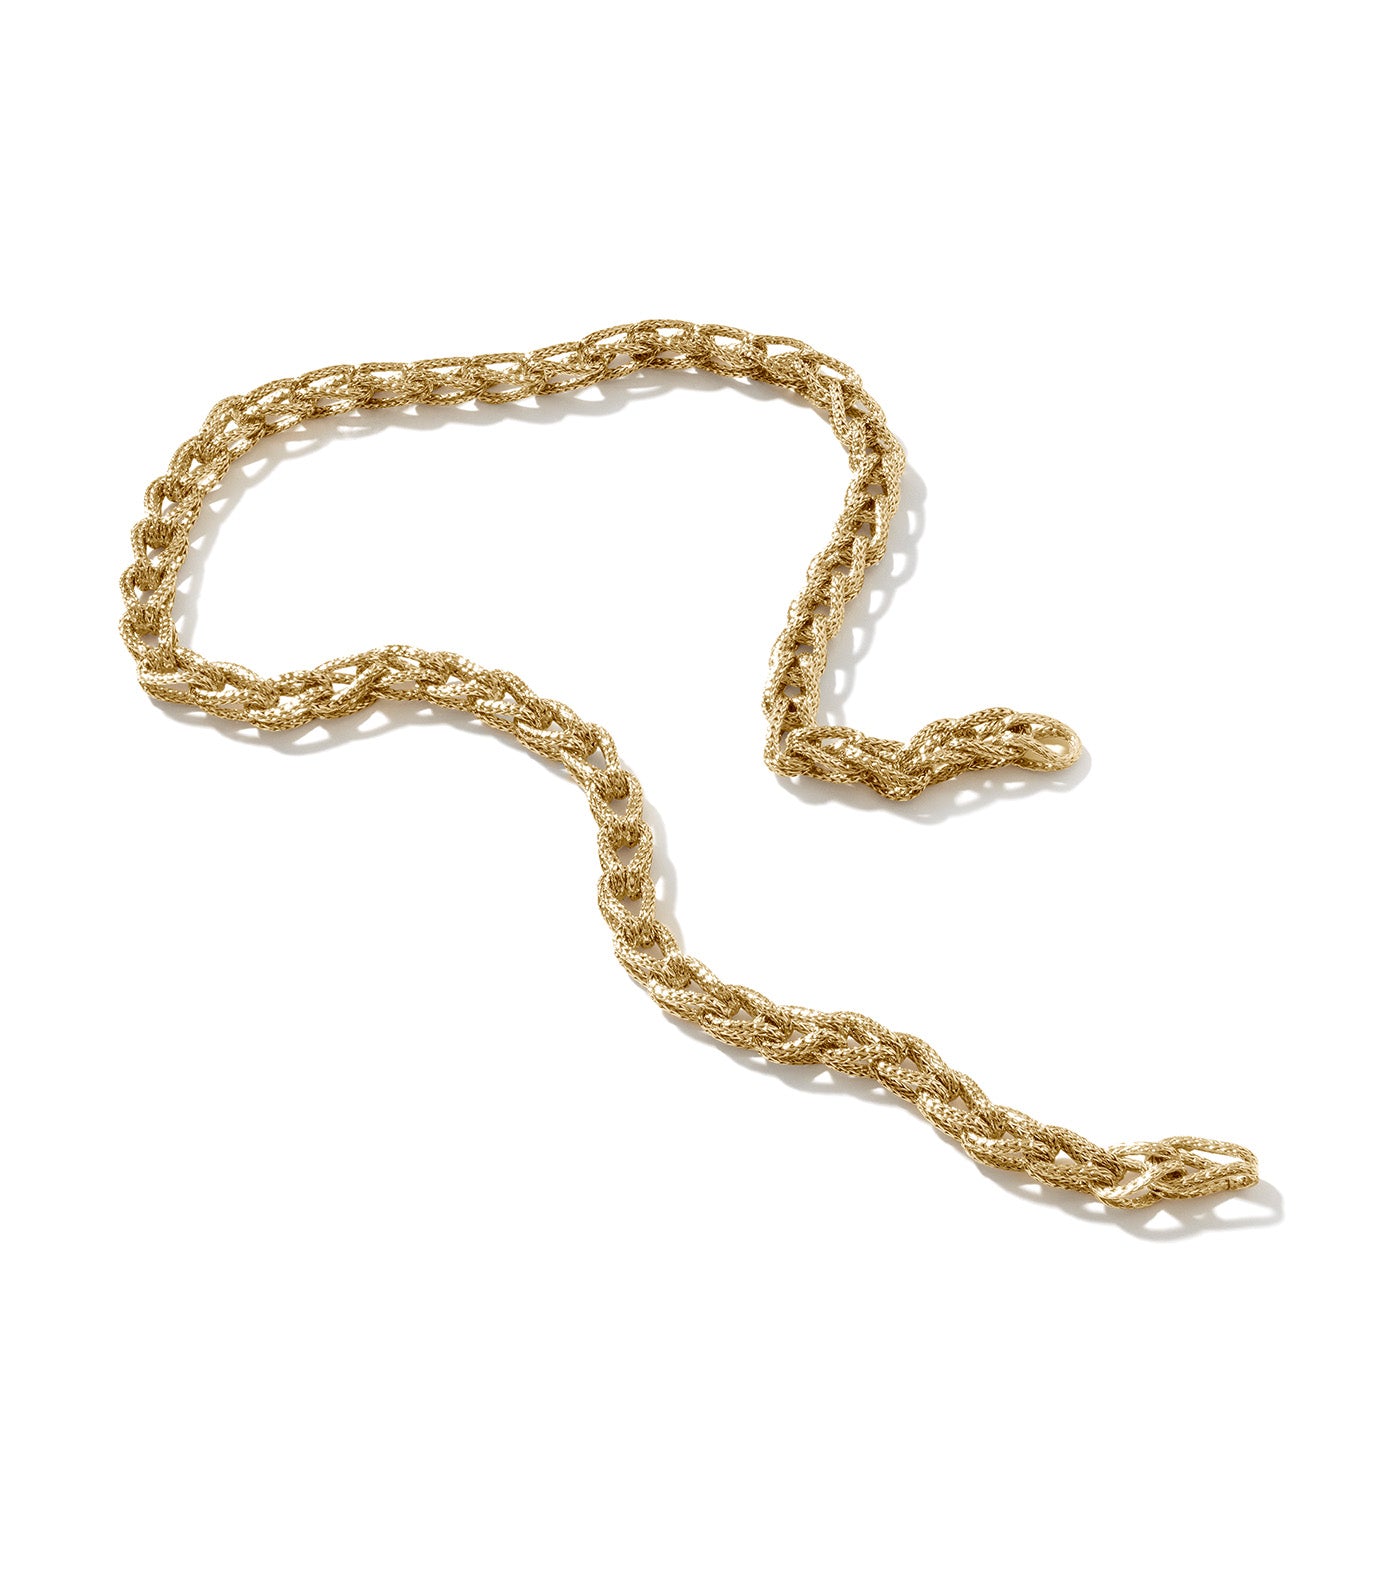 Asli Link 7mm Chain Necklace 18k Yellow Gold